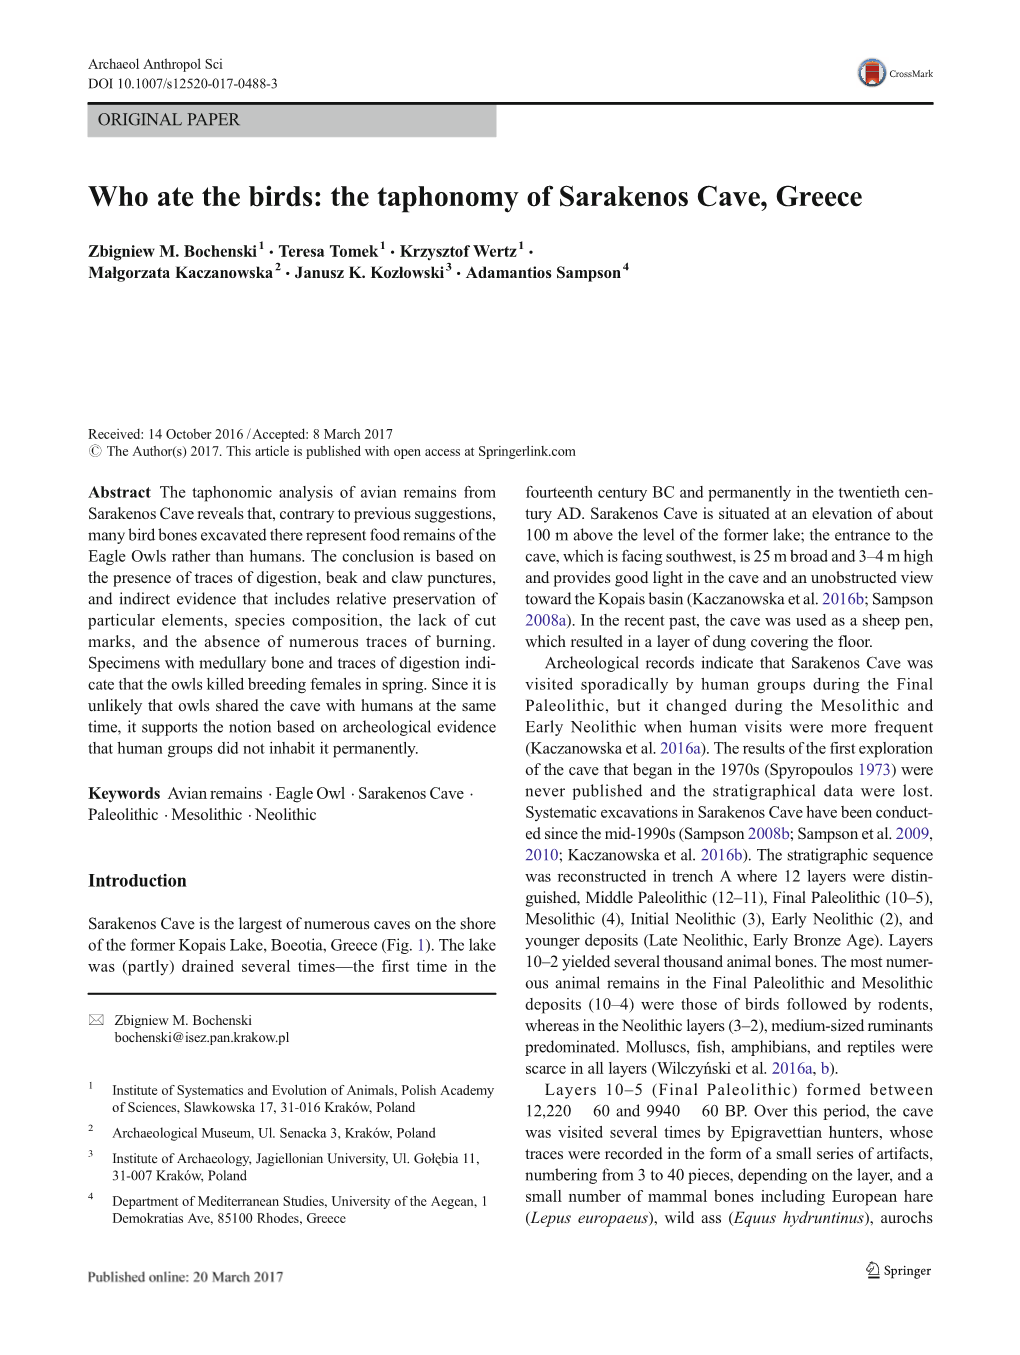 Who Ate the Birds: the Taphonomy of Sarakenos Cave, Greece